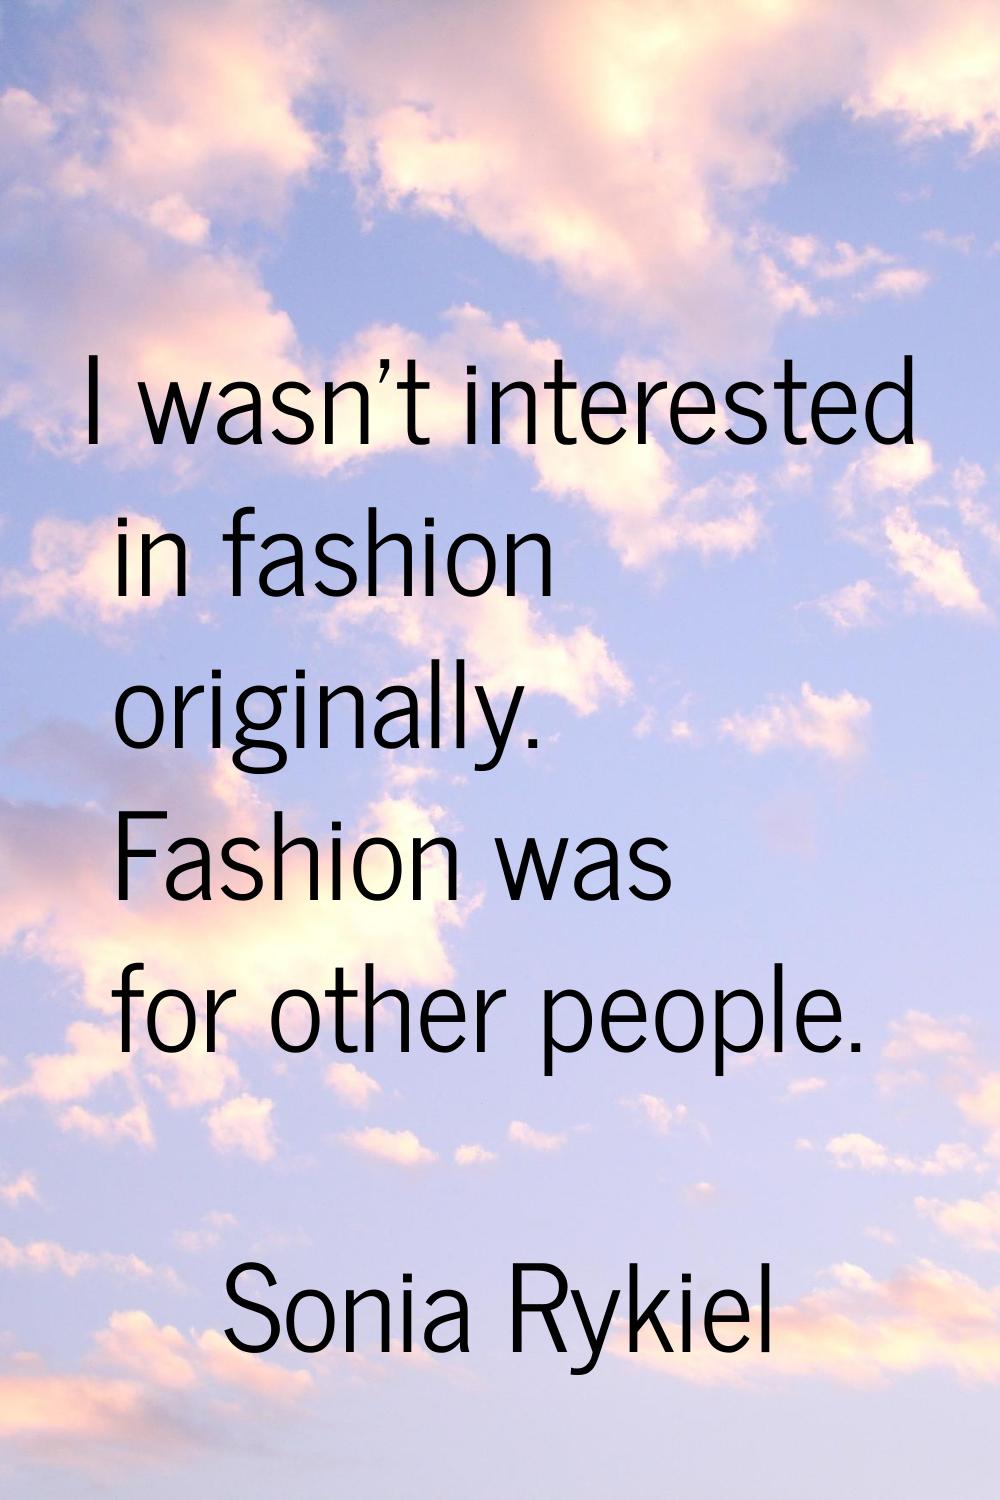 I wasn't interested in fashion originally. Fashion was for other people.